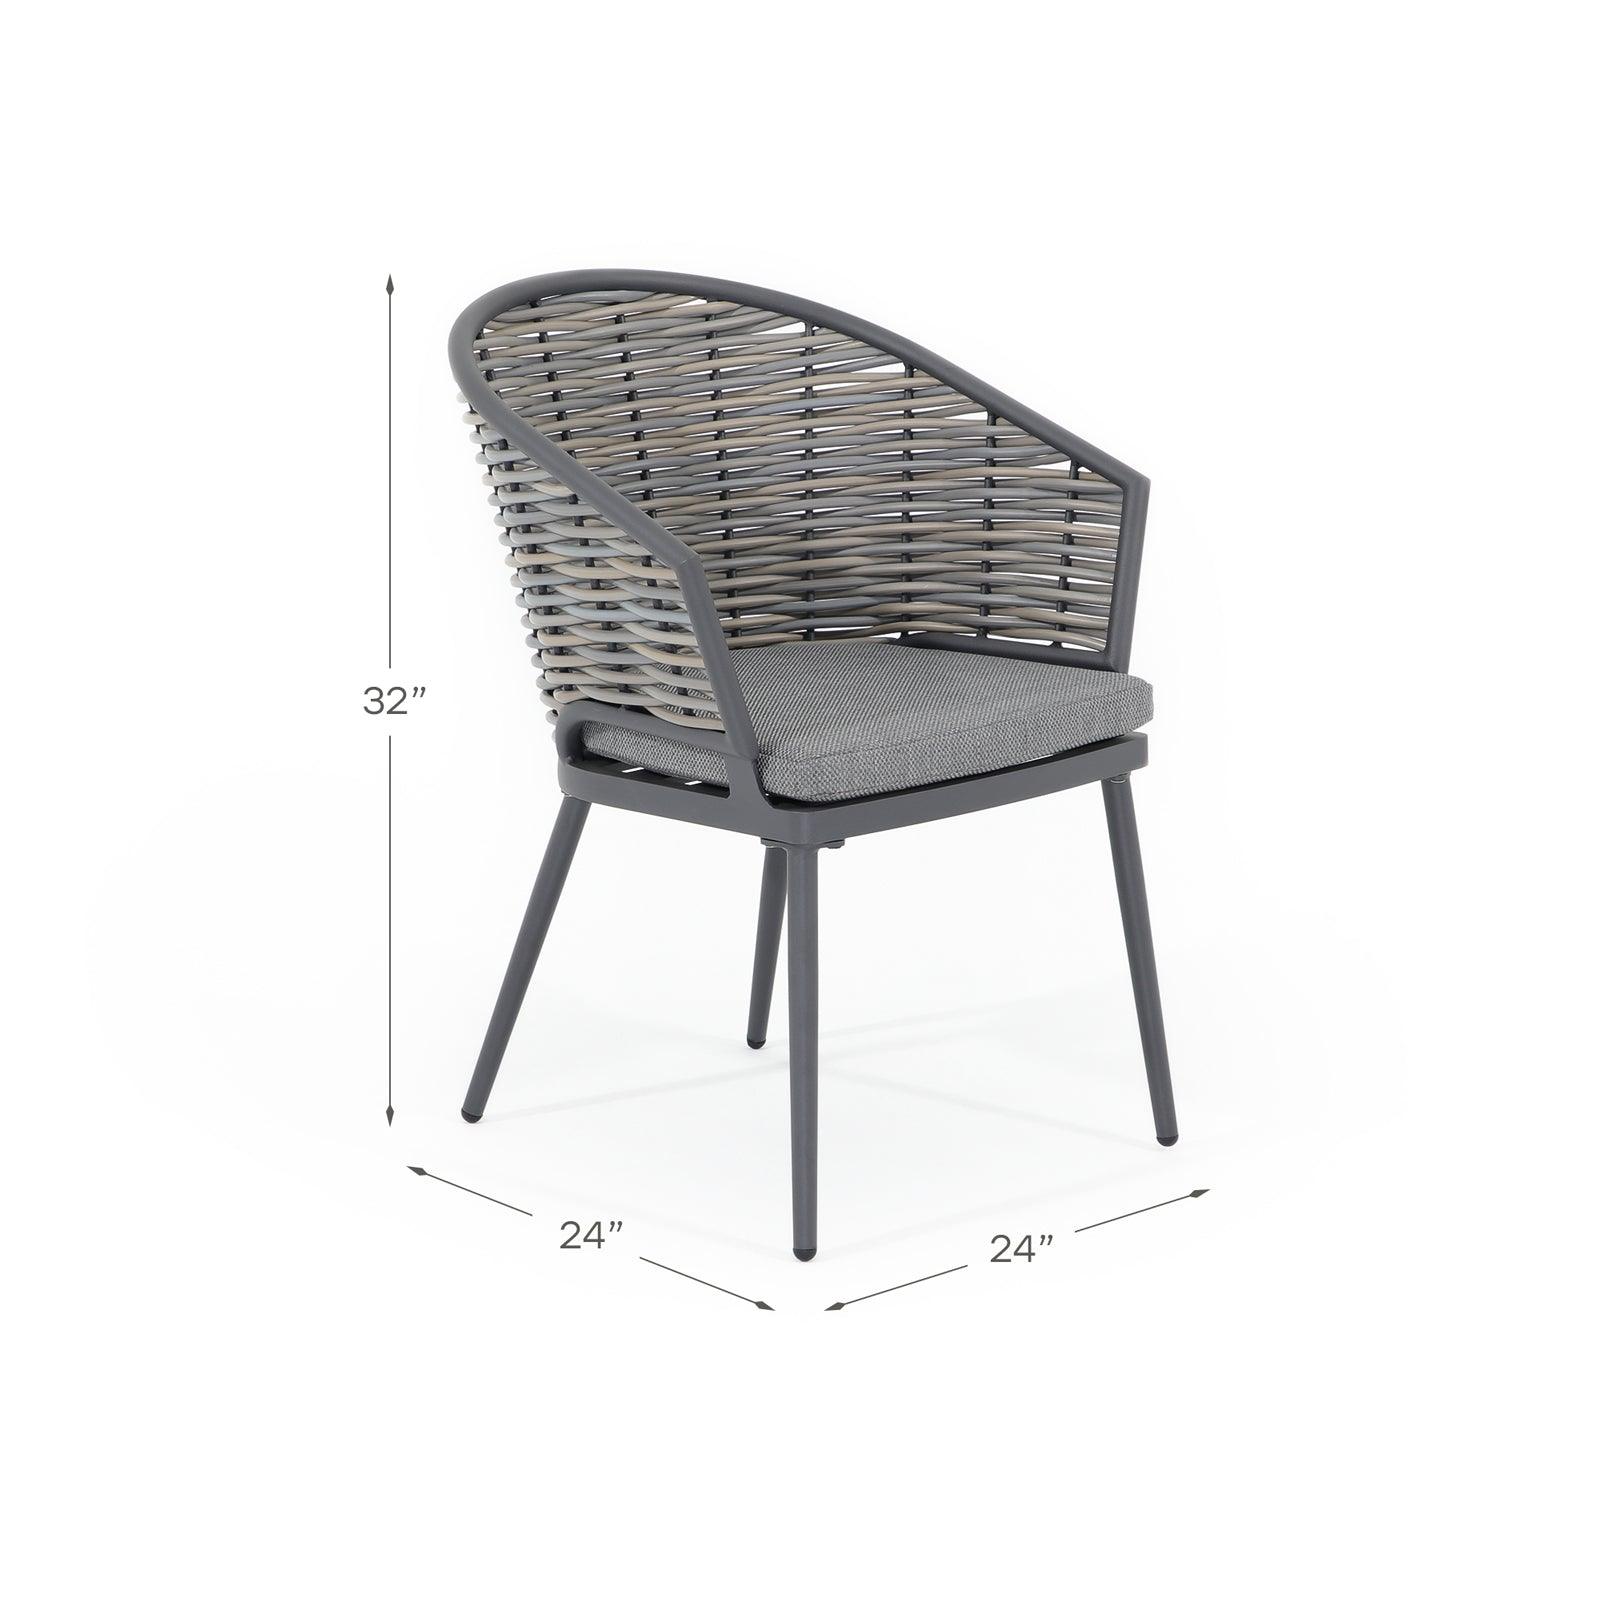 Burano Grey wicker outdoor Dining chair with aluminum frame, grey cushions, Dimension information - Jardina Furniture